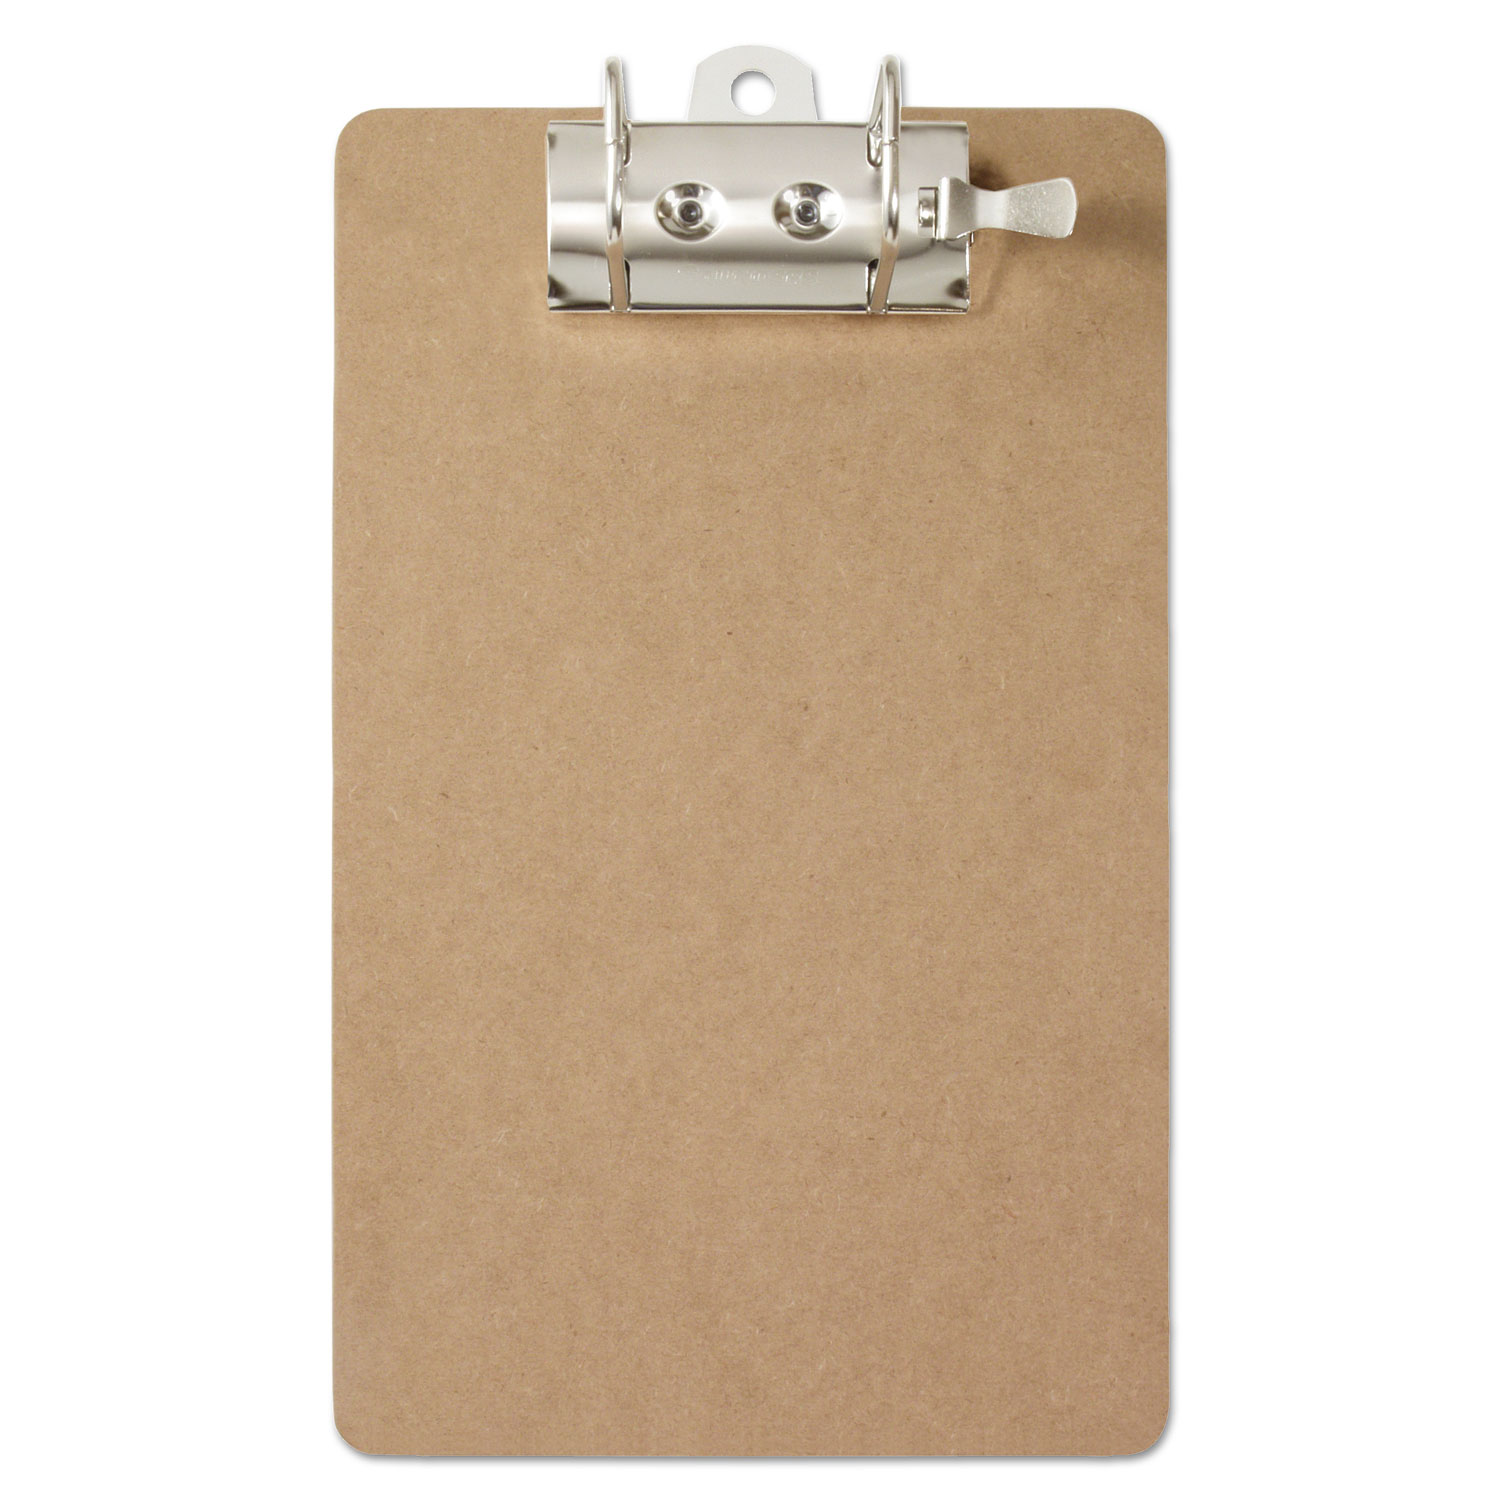 Arch Clipboard, 2 Capacity, Holds 8 1/2w x 12h, Brown